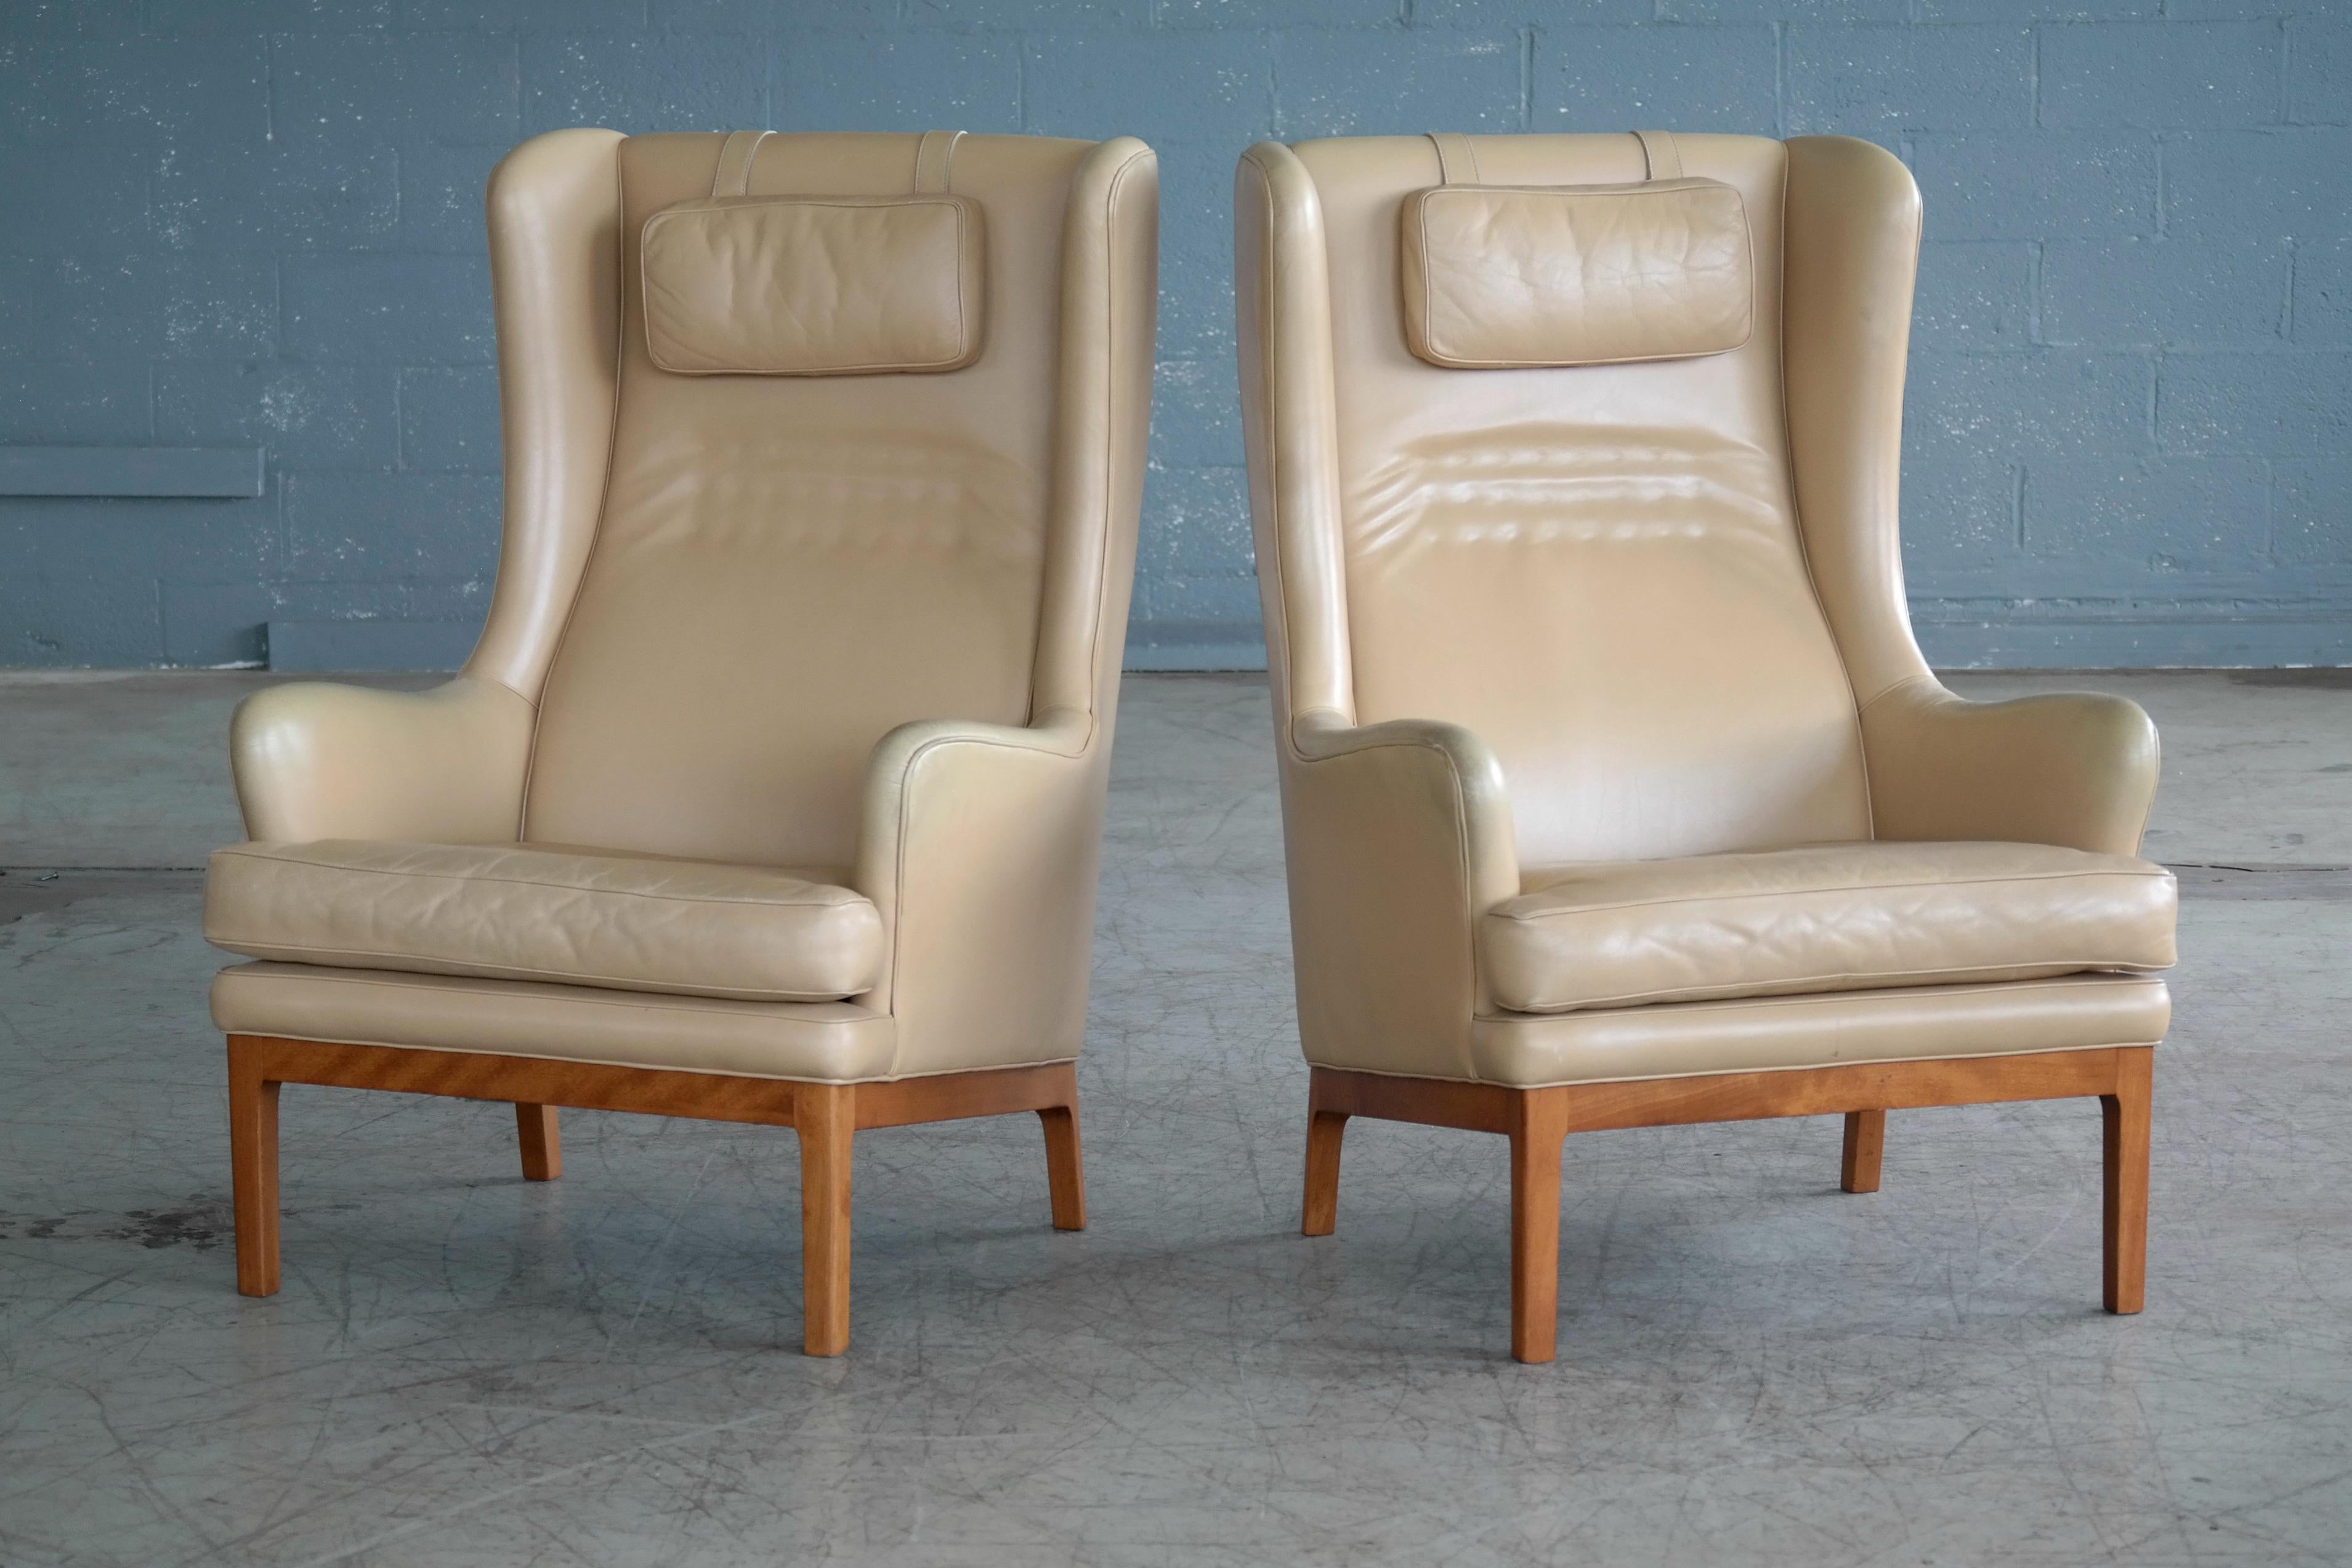 Super stylish and equally comfortable high back lounge chairs designed by Swedish design icon, Arne Norell in the late 1960s and manufactured sometime in the 1970s. Perfect for spending hours curled up with your favourite book or listening to music.